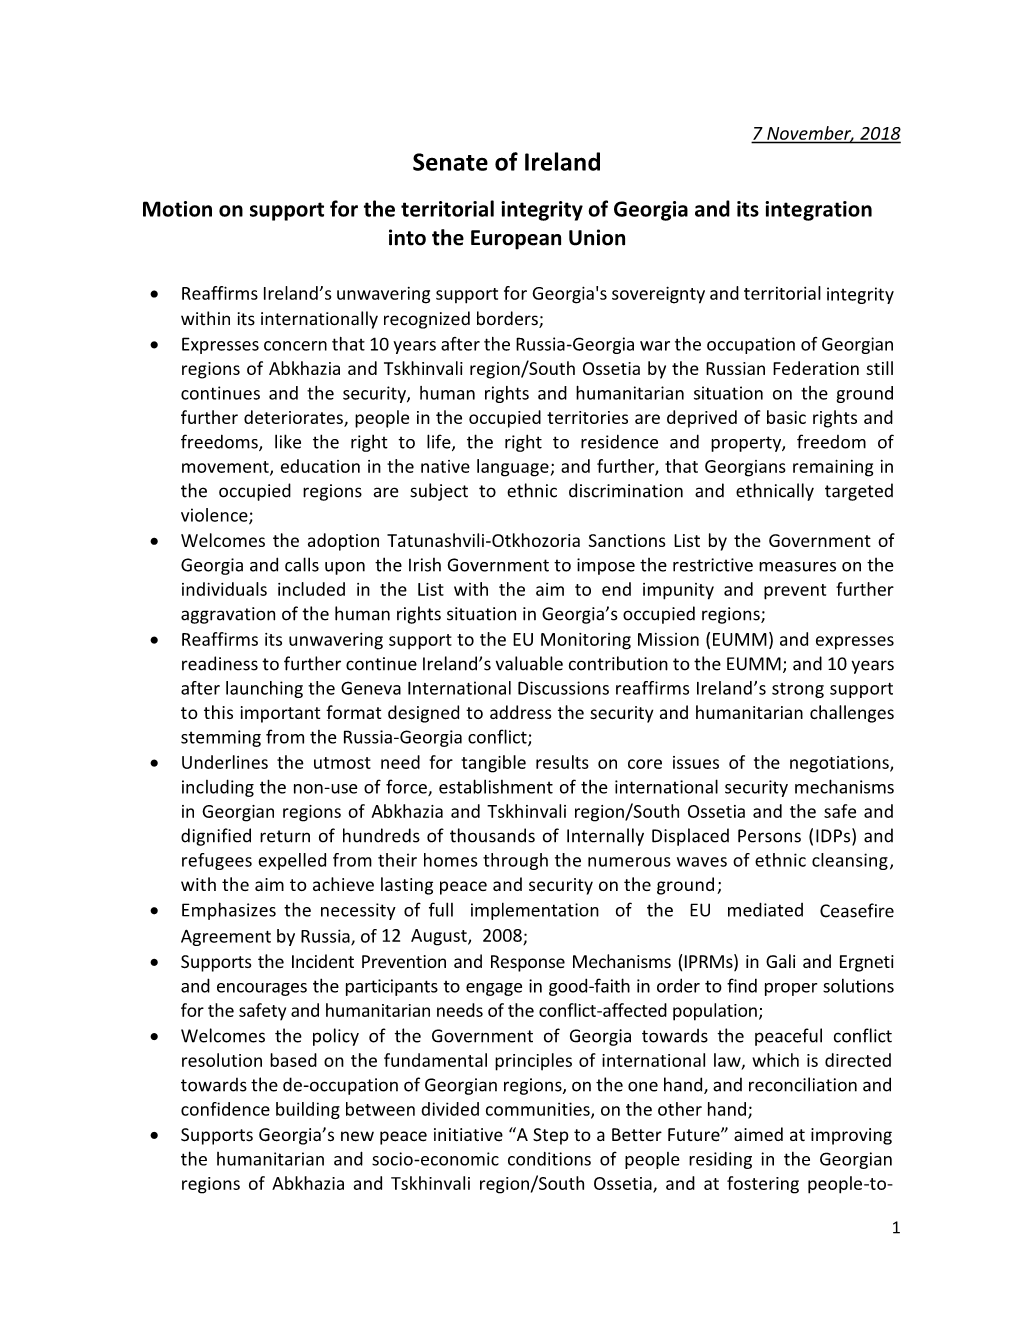 Senate of Ireland Motion on Support for the Territorial Integrity of Georgia and Its Integration Into the European Union